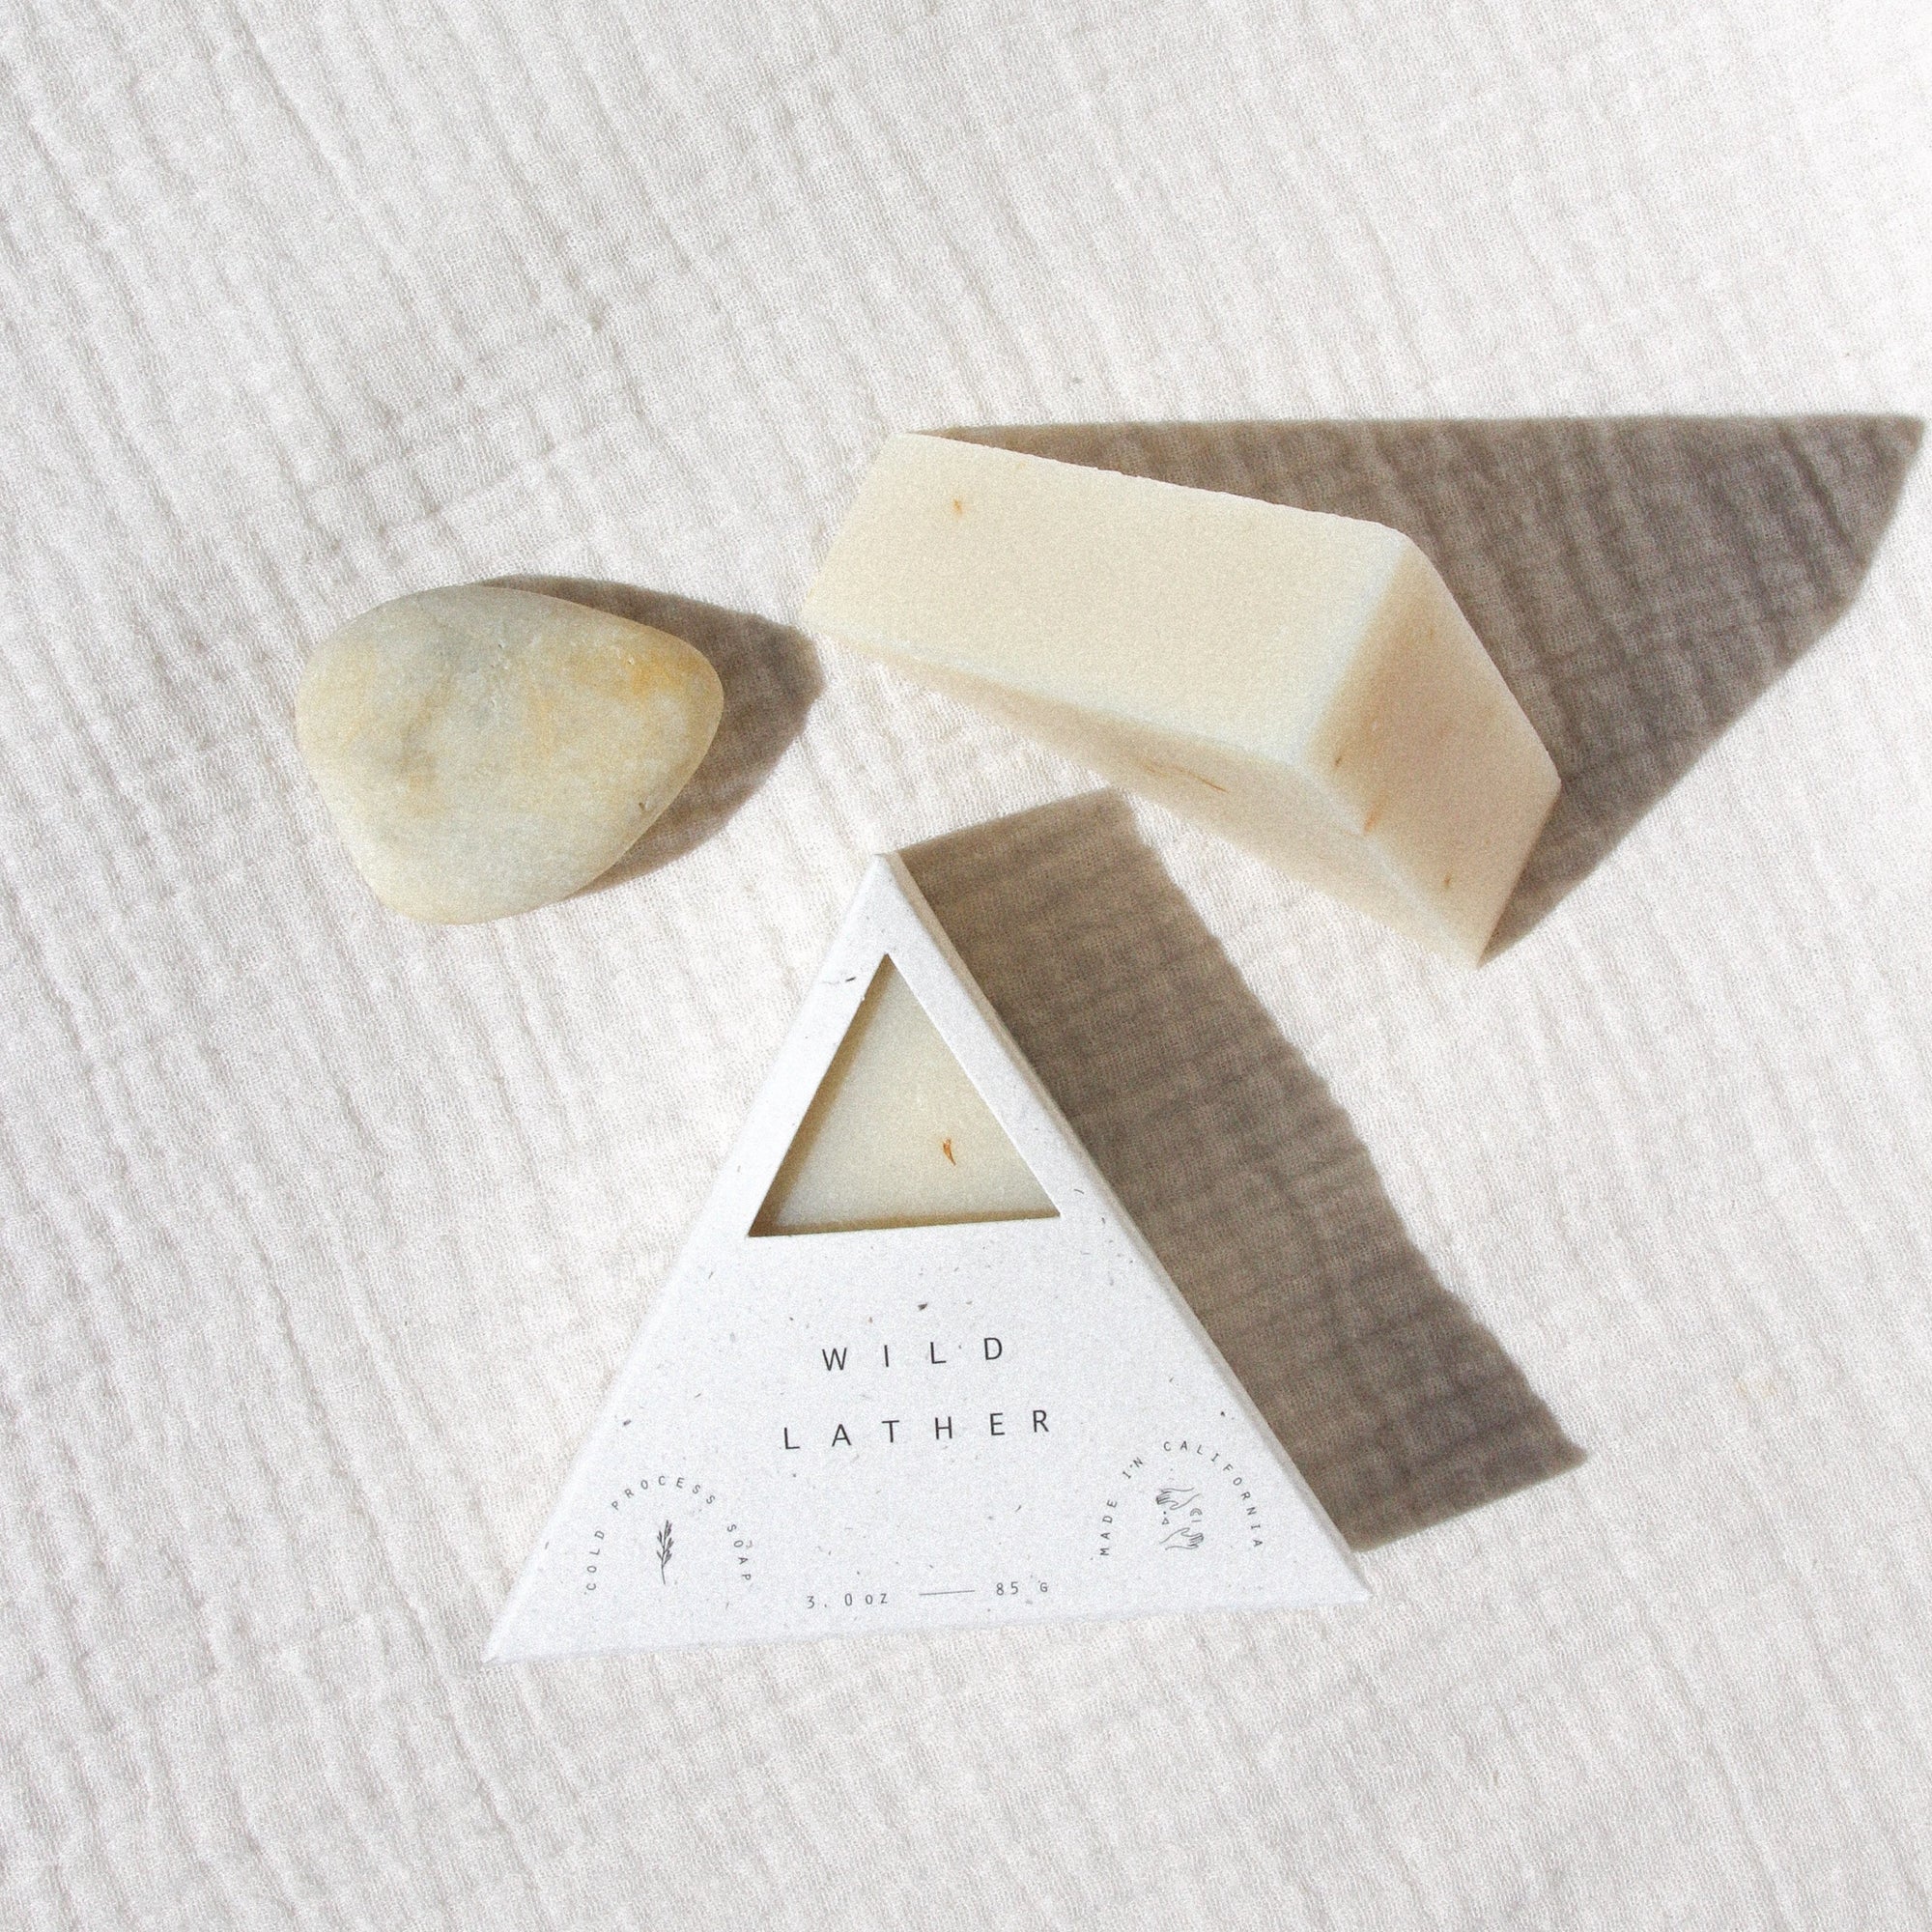 Two triangle soaps and a stone on a textured beige linen cloth